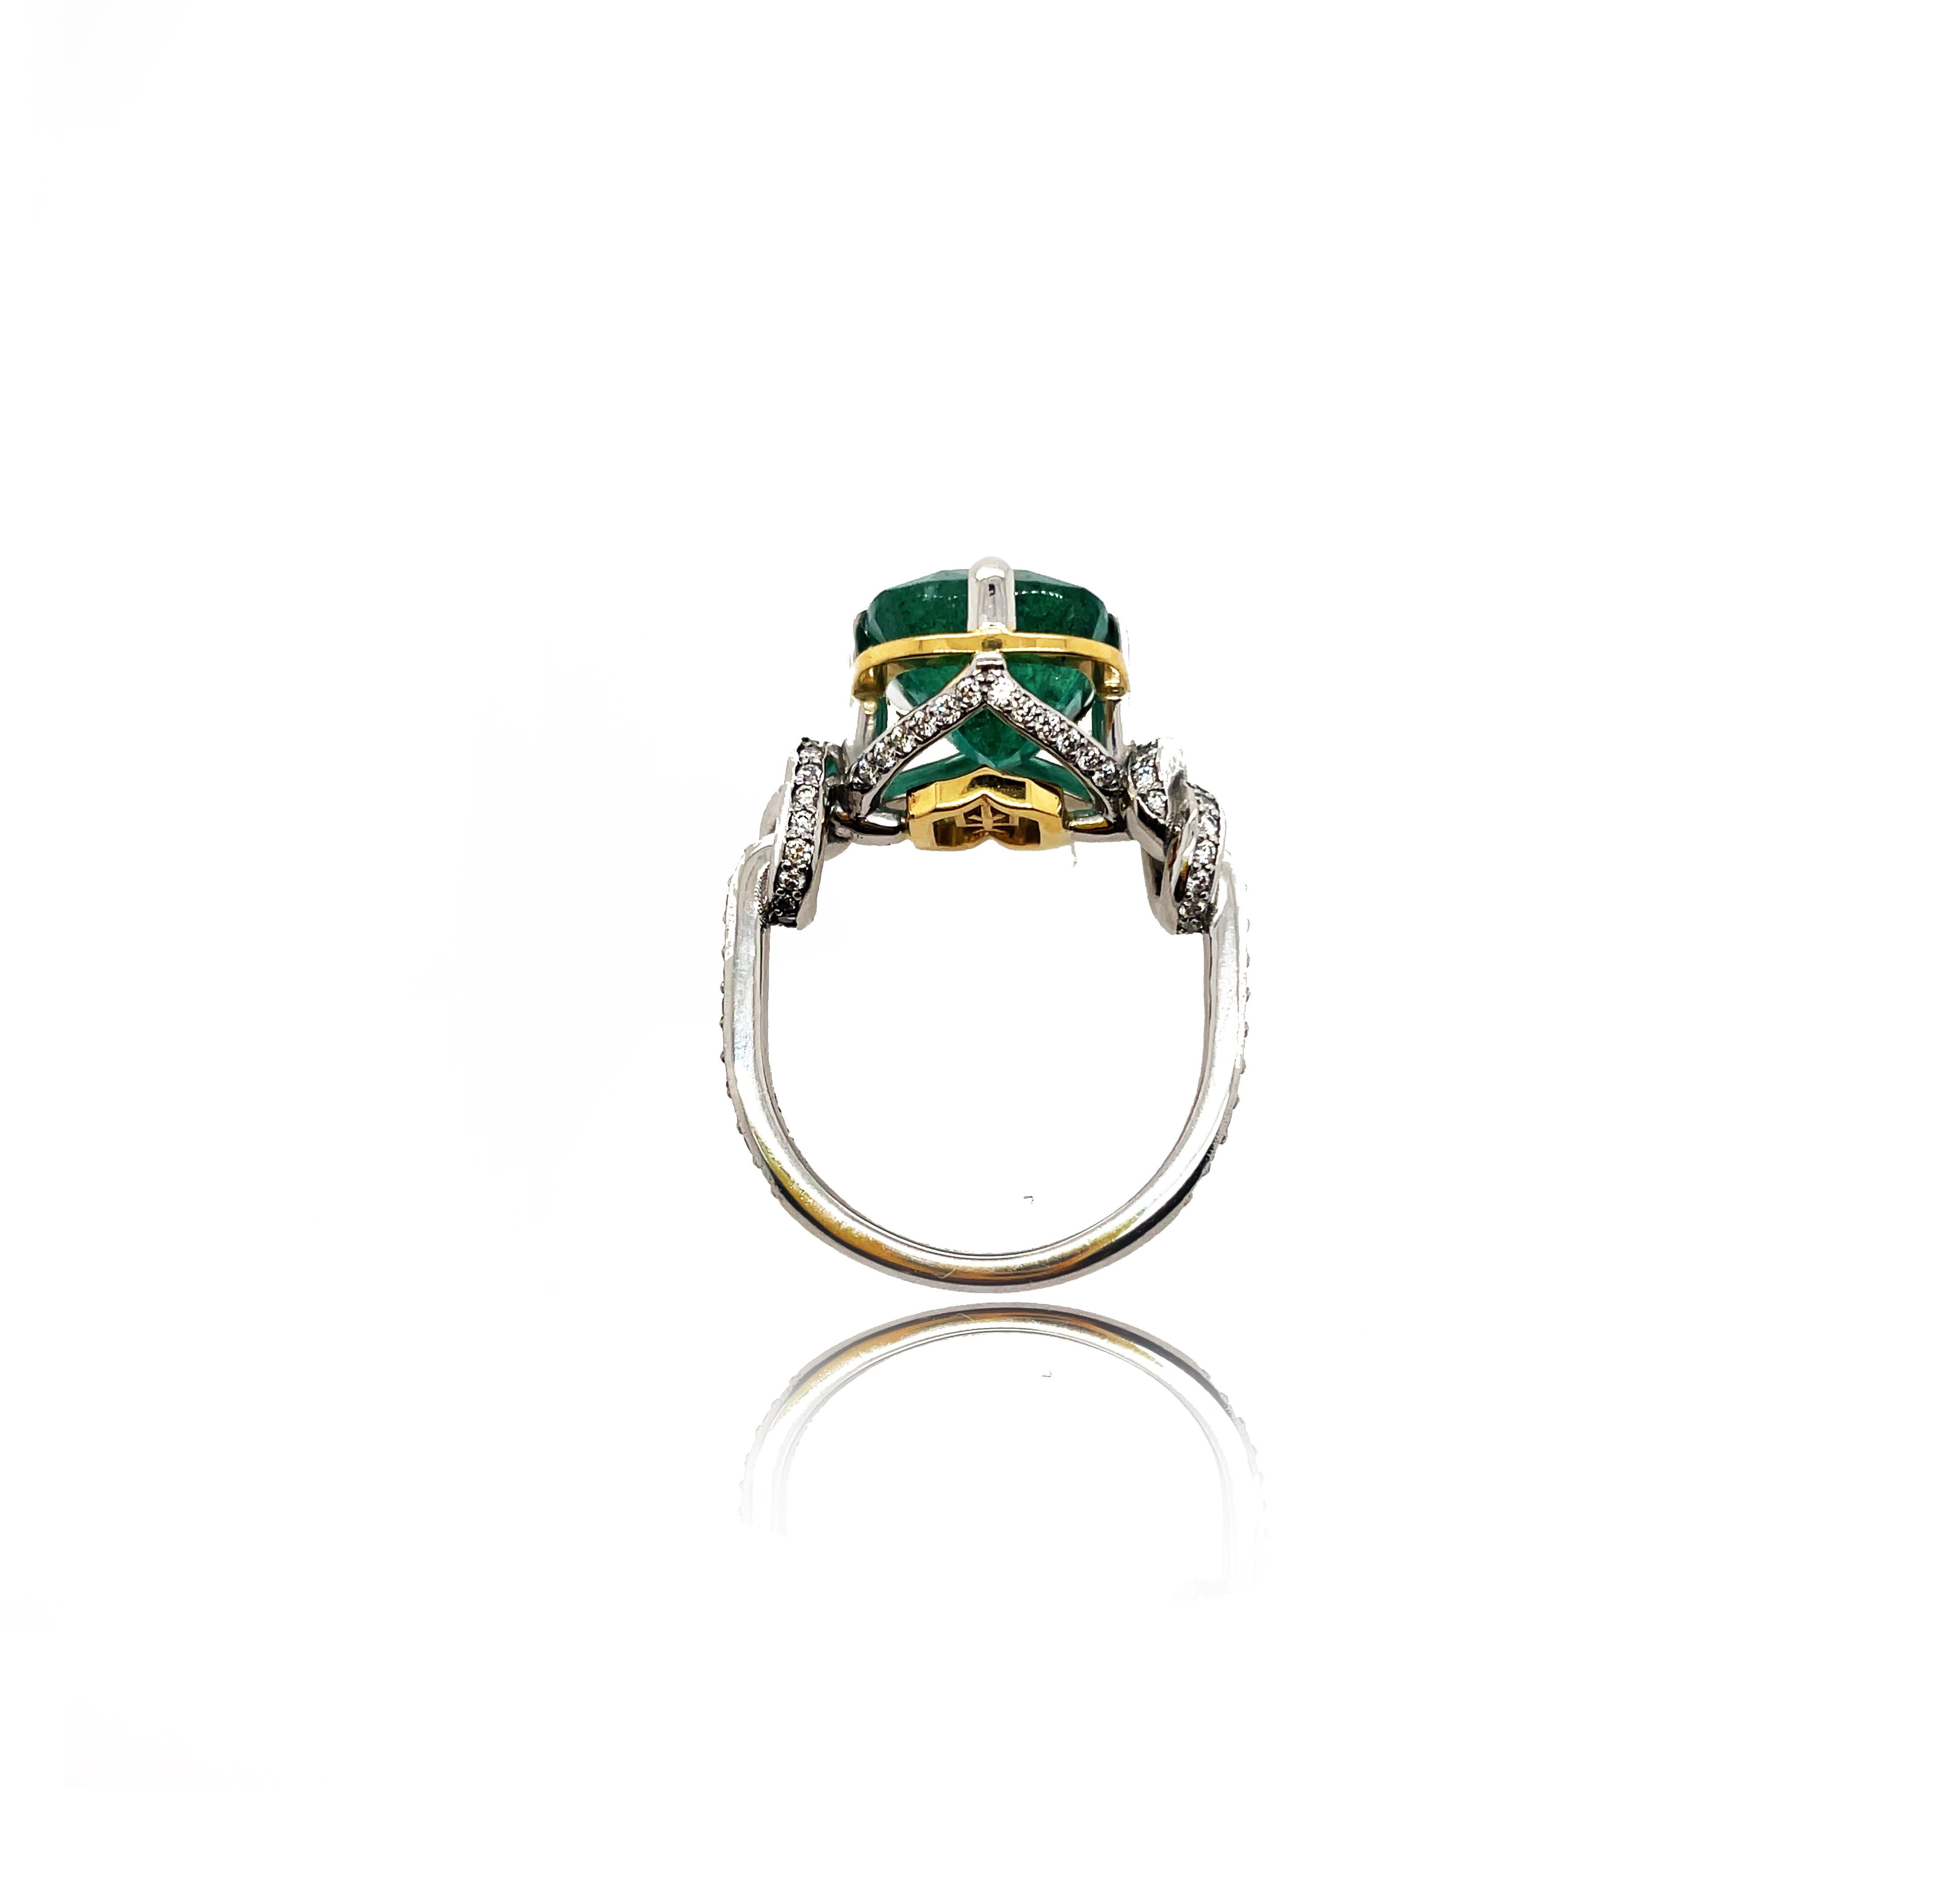 For Sale:  4.96ct Natural Cushion Cut Emerald and Diamond Ring in platinum and 22k gold 4